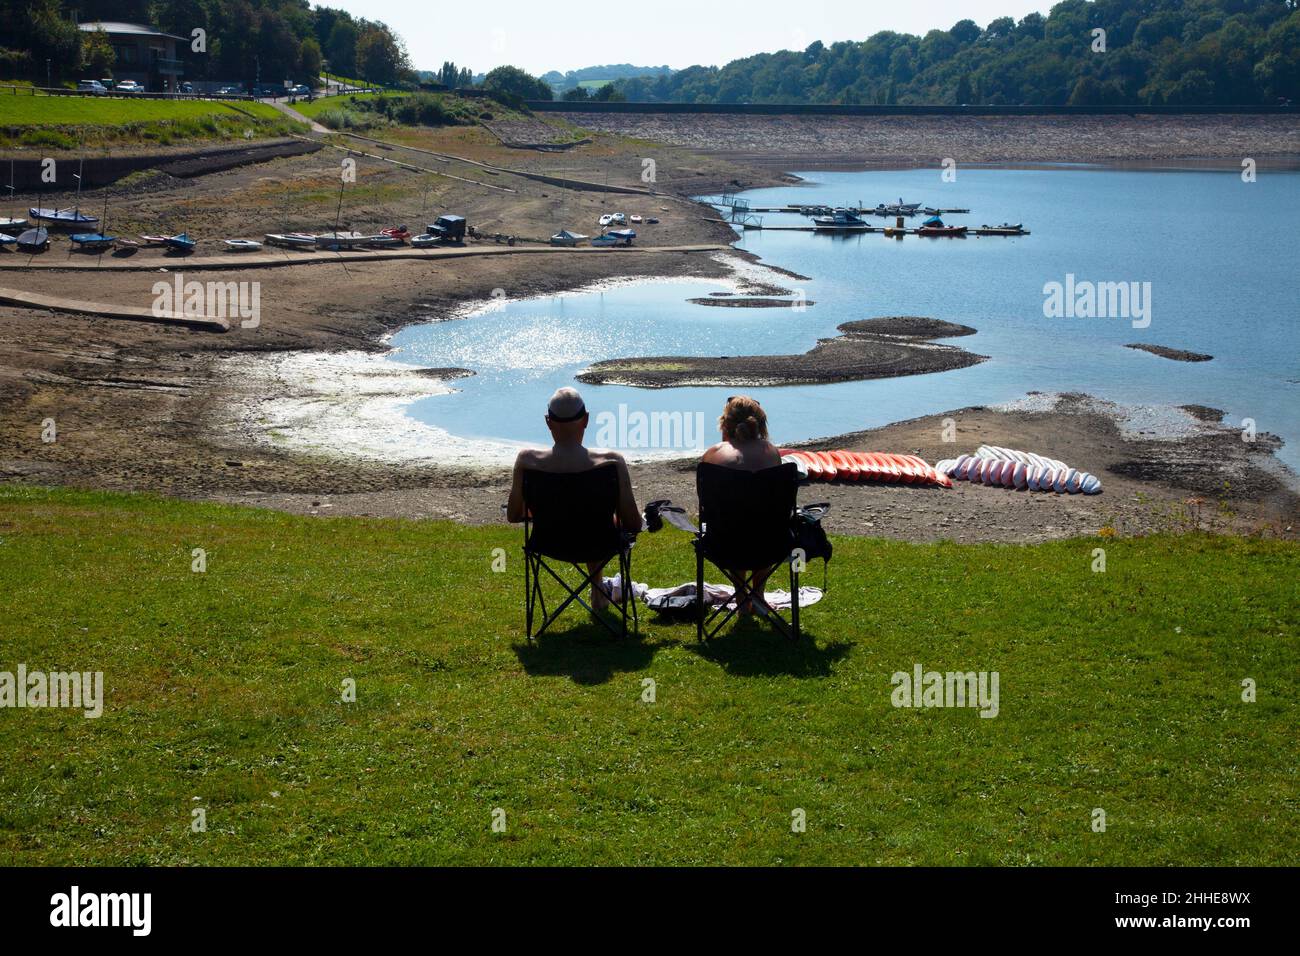 Llandegfedd Reservoir lake low water level 2 people in deckchairs with backs to camera on grass, beached yachts, boats trees summer copy space Stock Photo